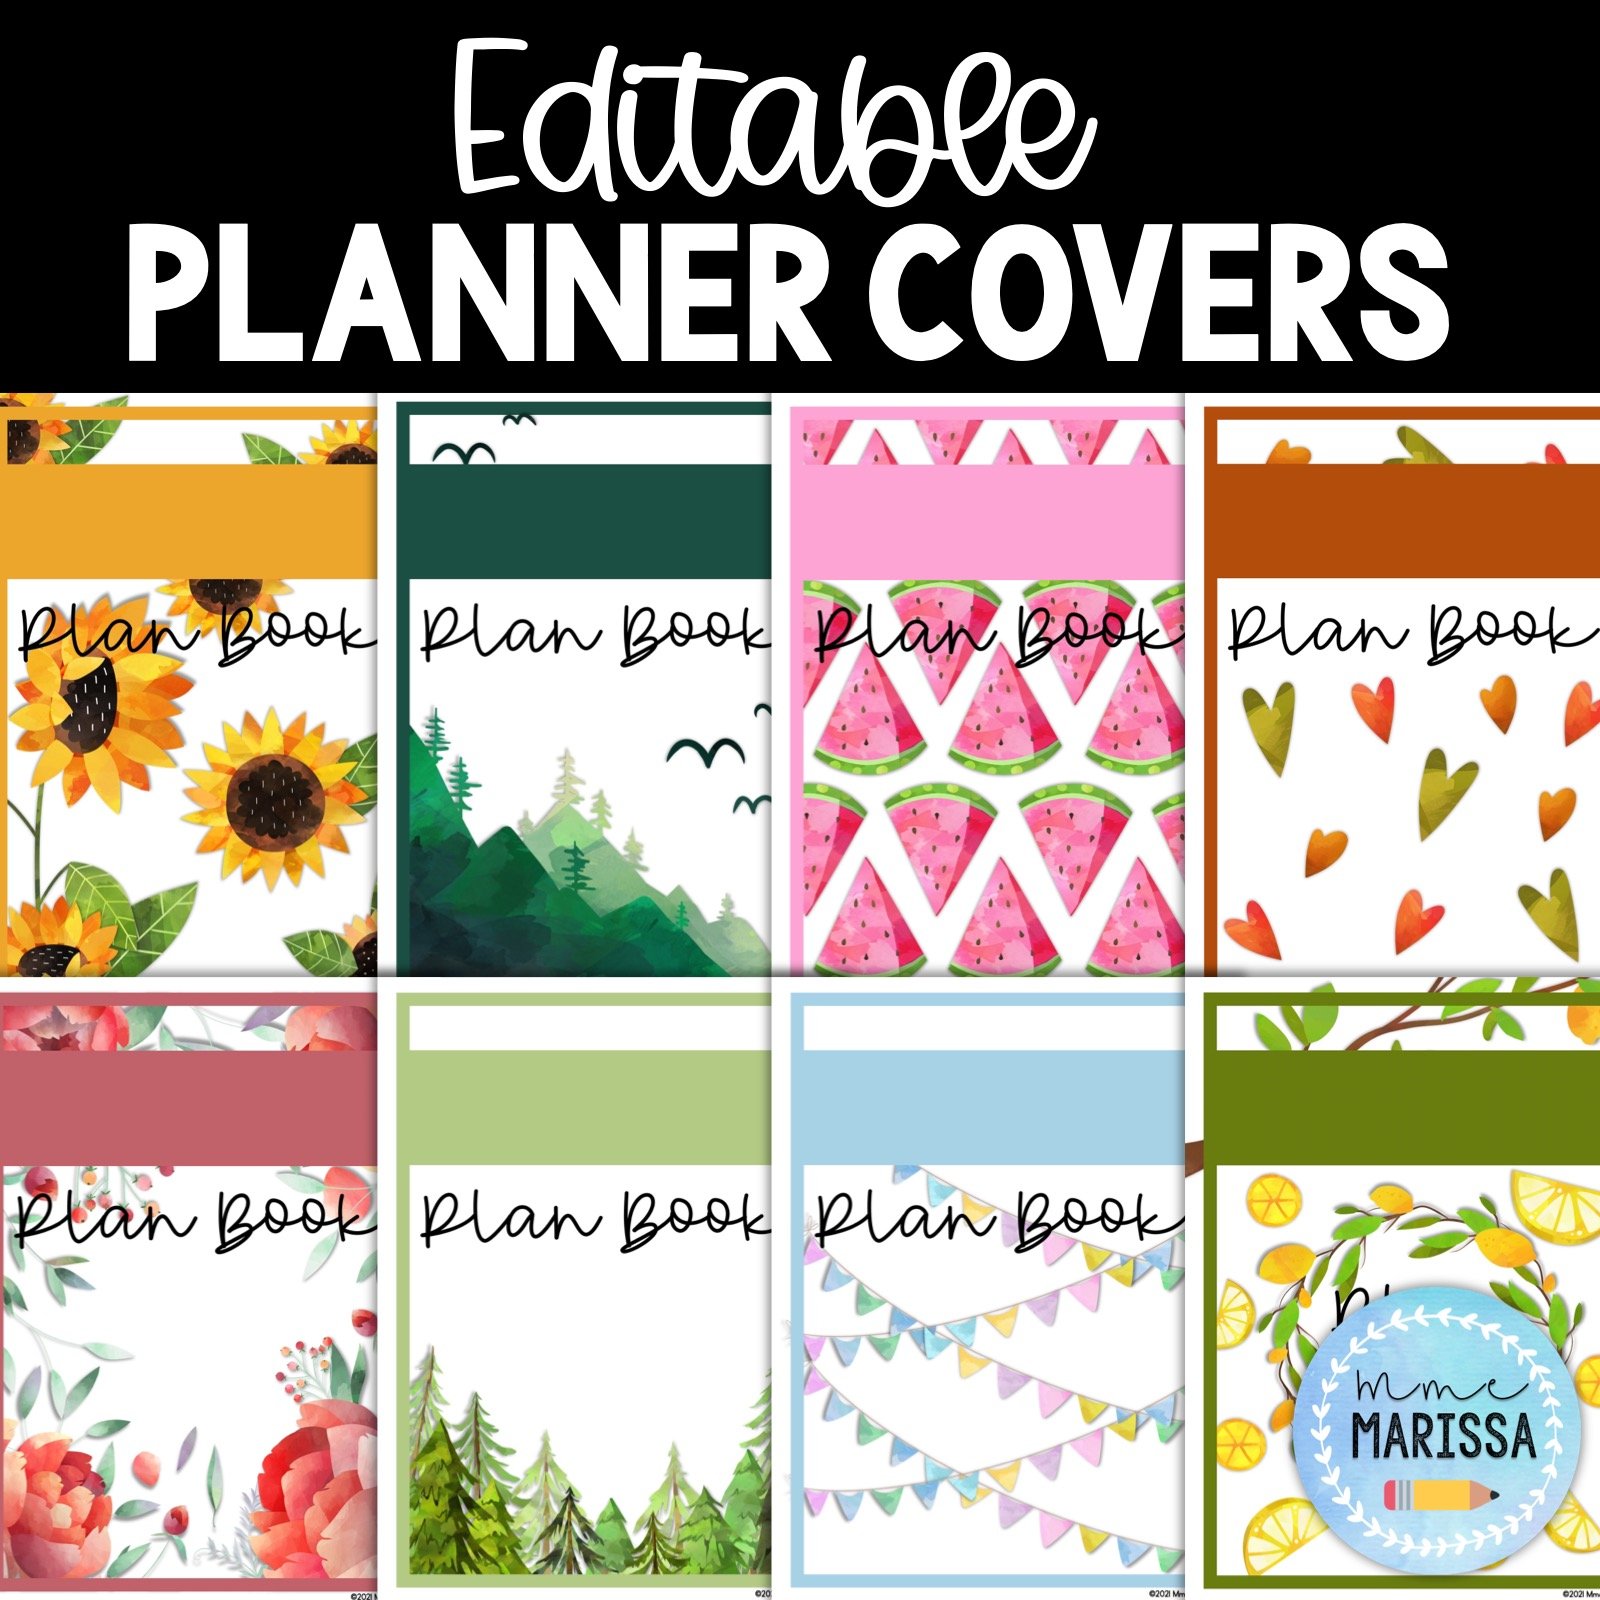 Planners (cover).jpeg